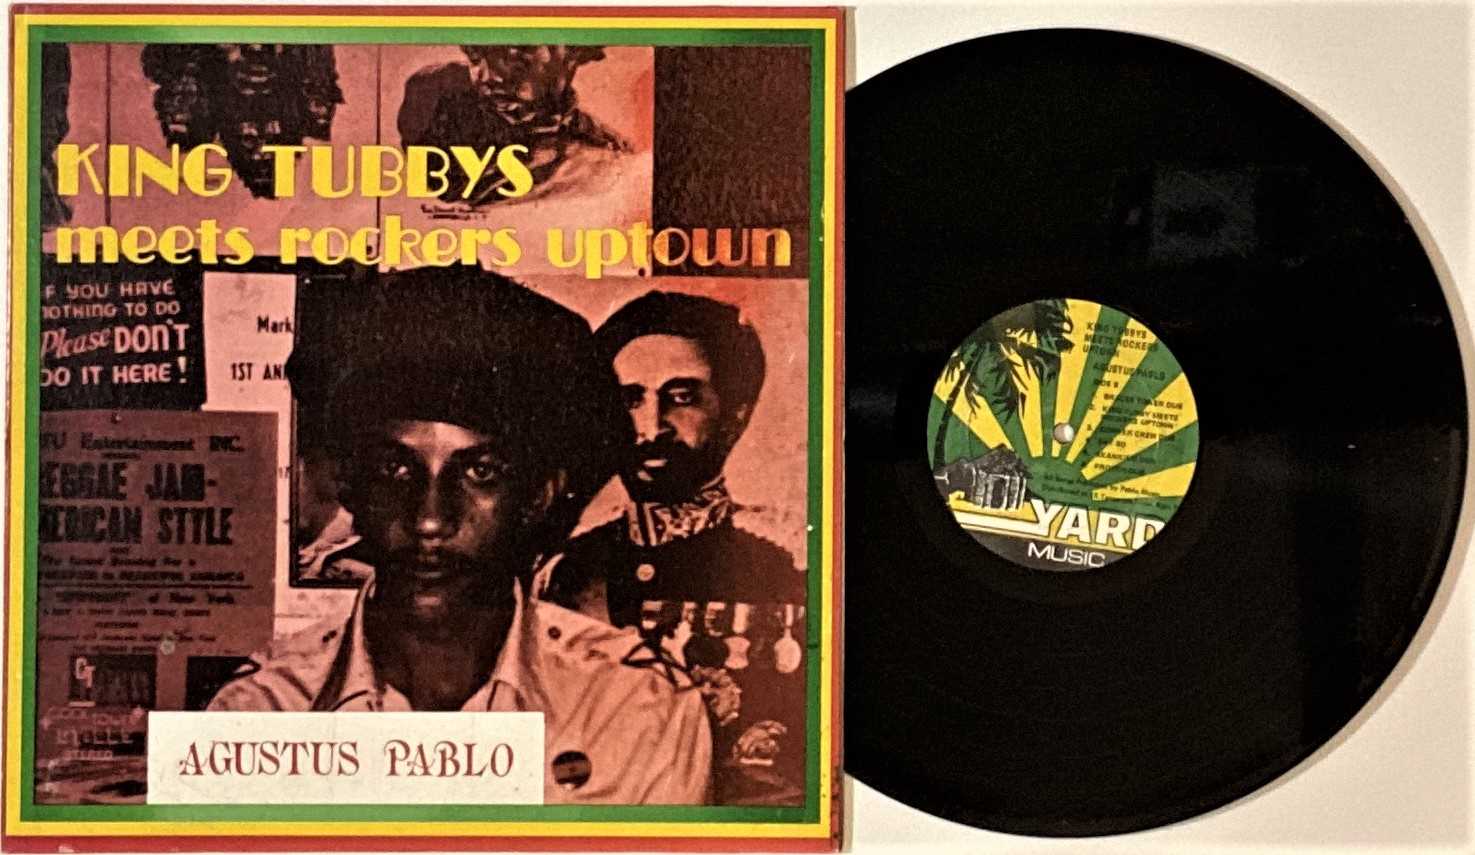 AUGUSTUS PABLO/KING TUBBY - LPs - Image 5 of 9